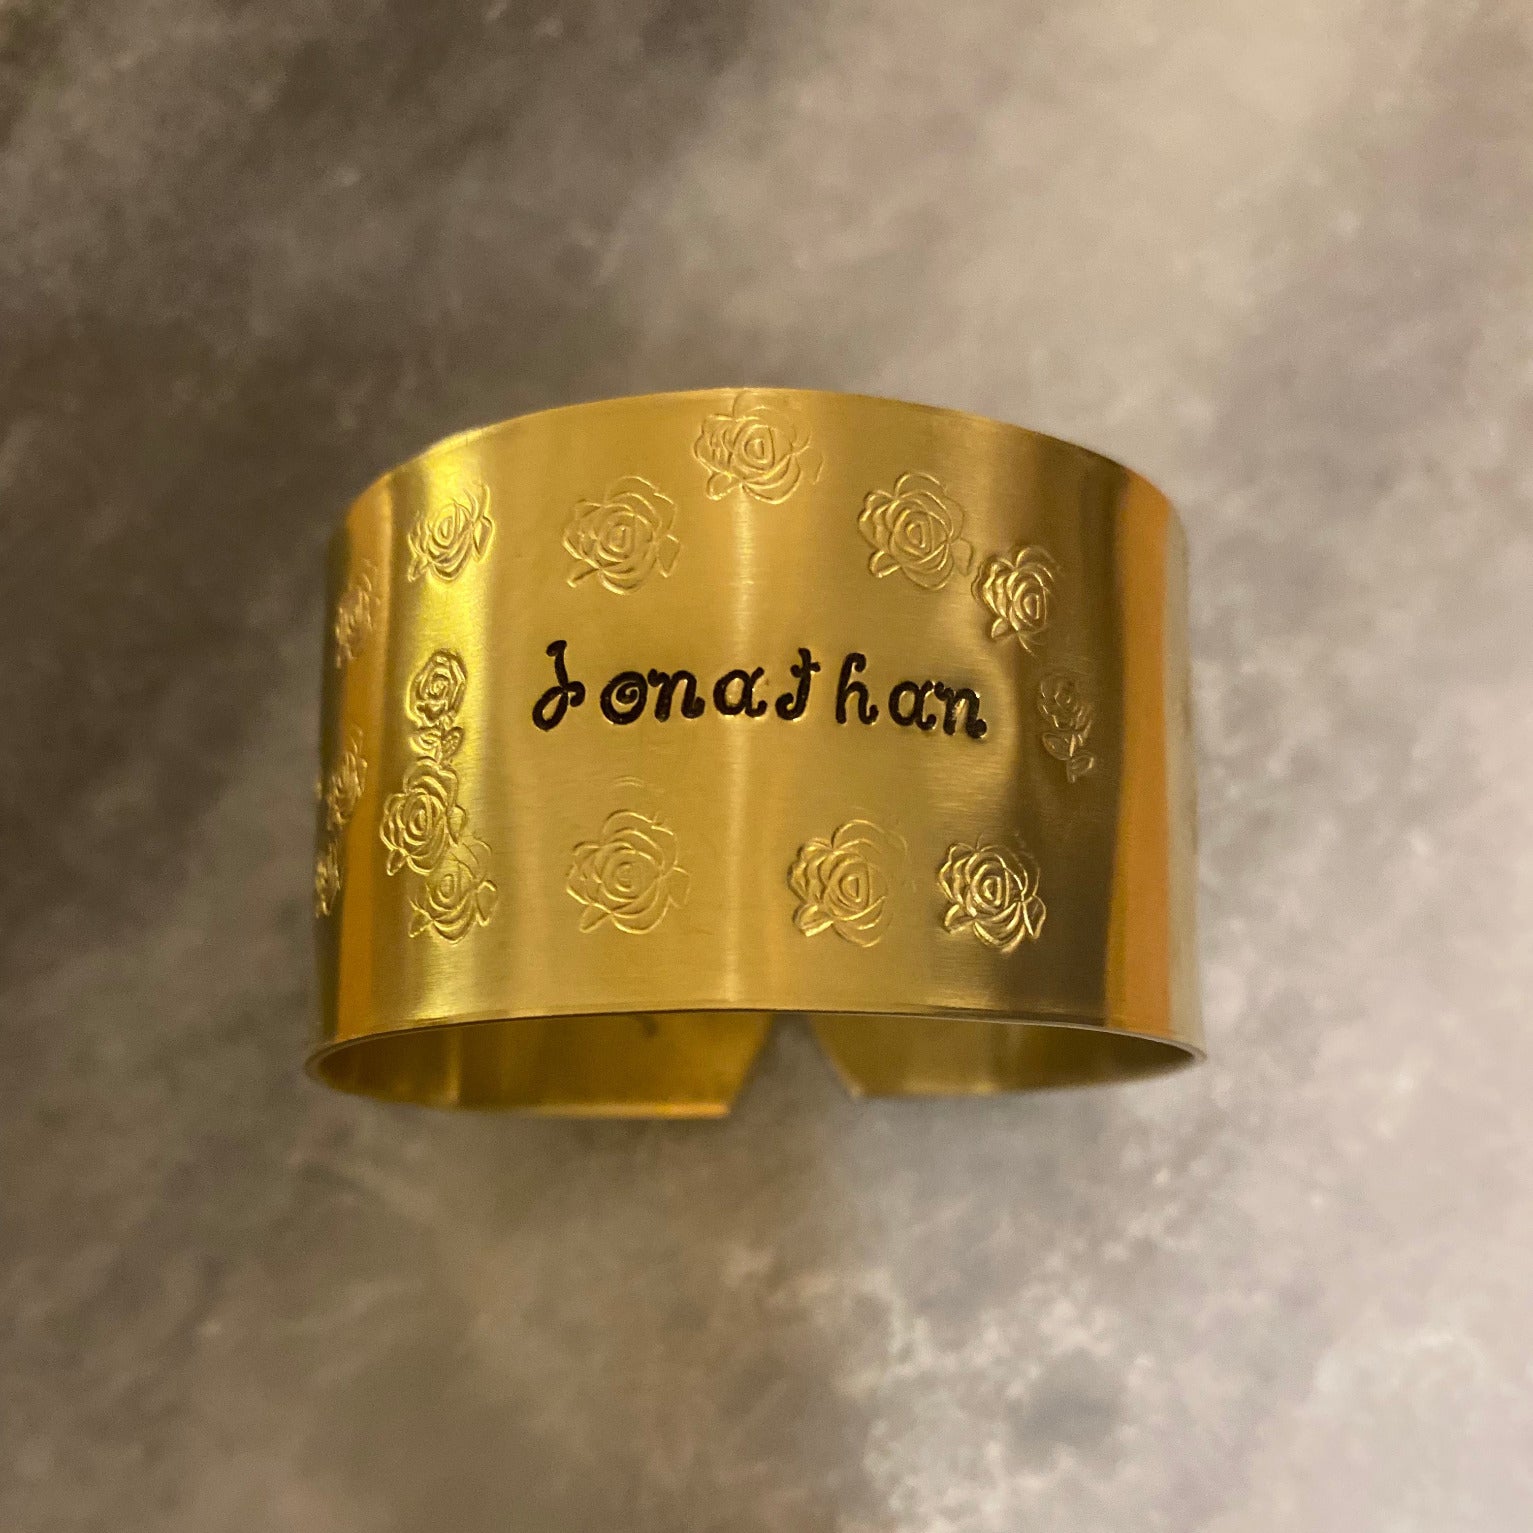 Already engraved 🍀 "Mom" hammered with shooting star